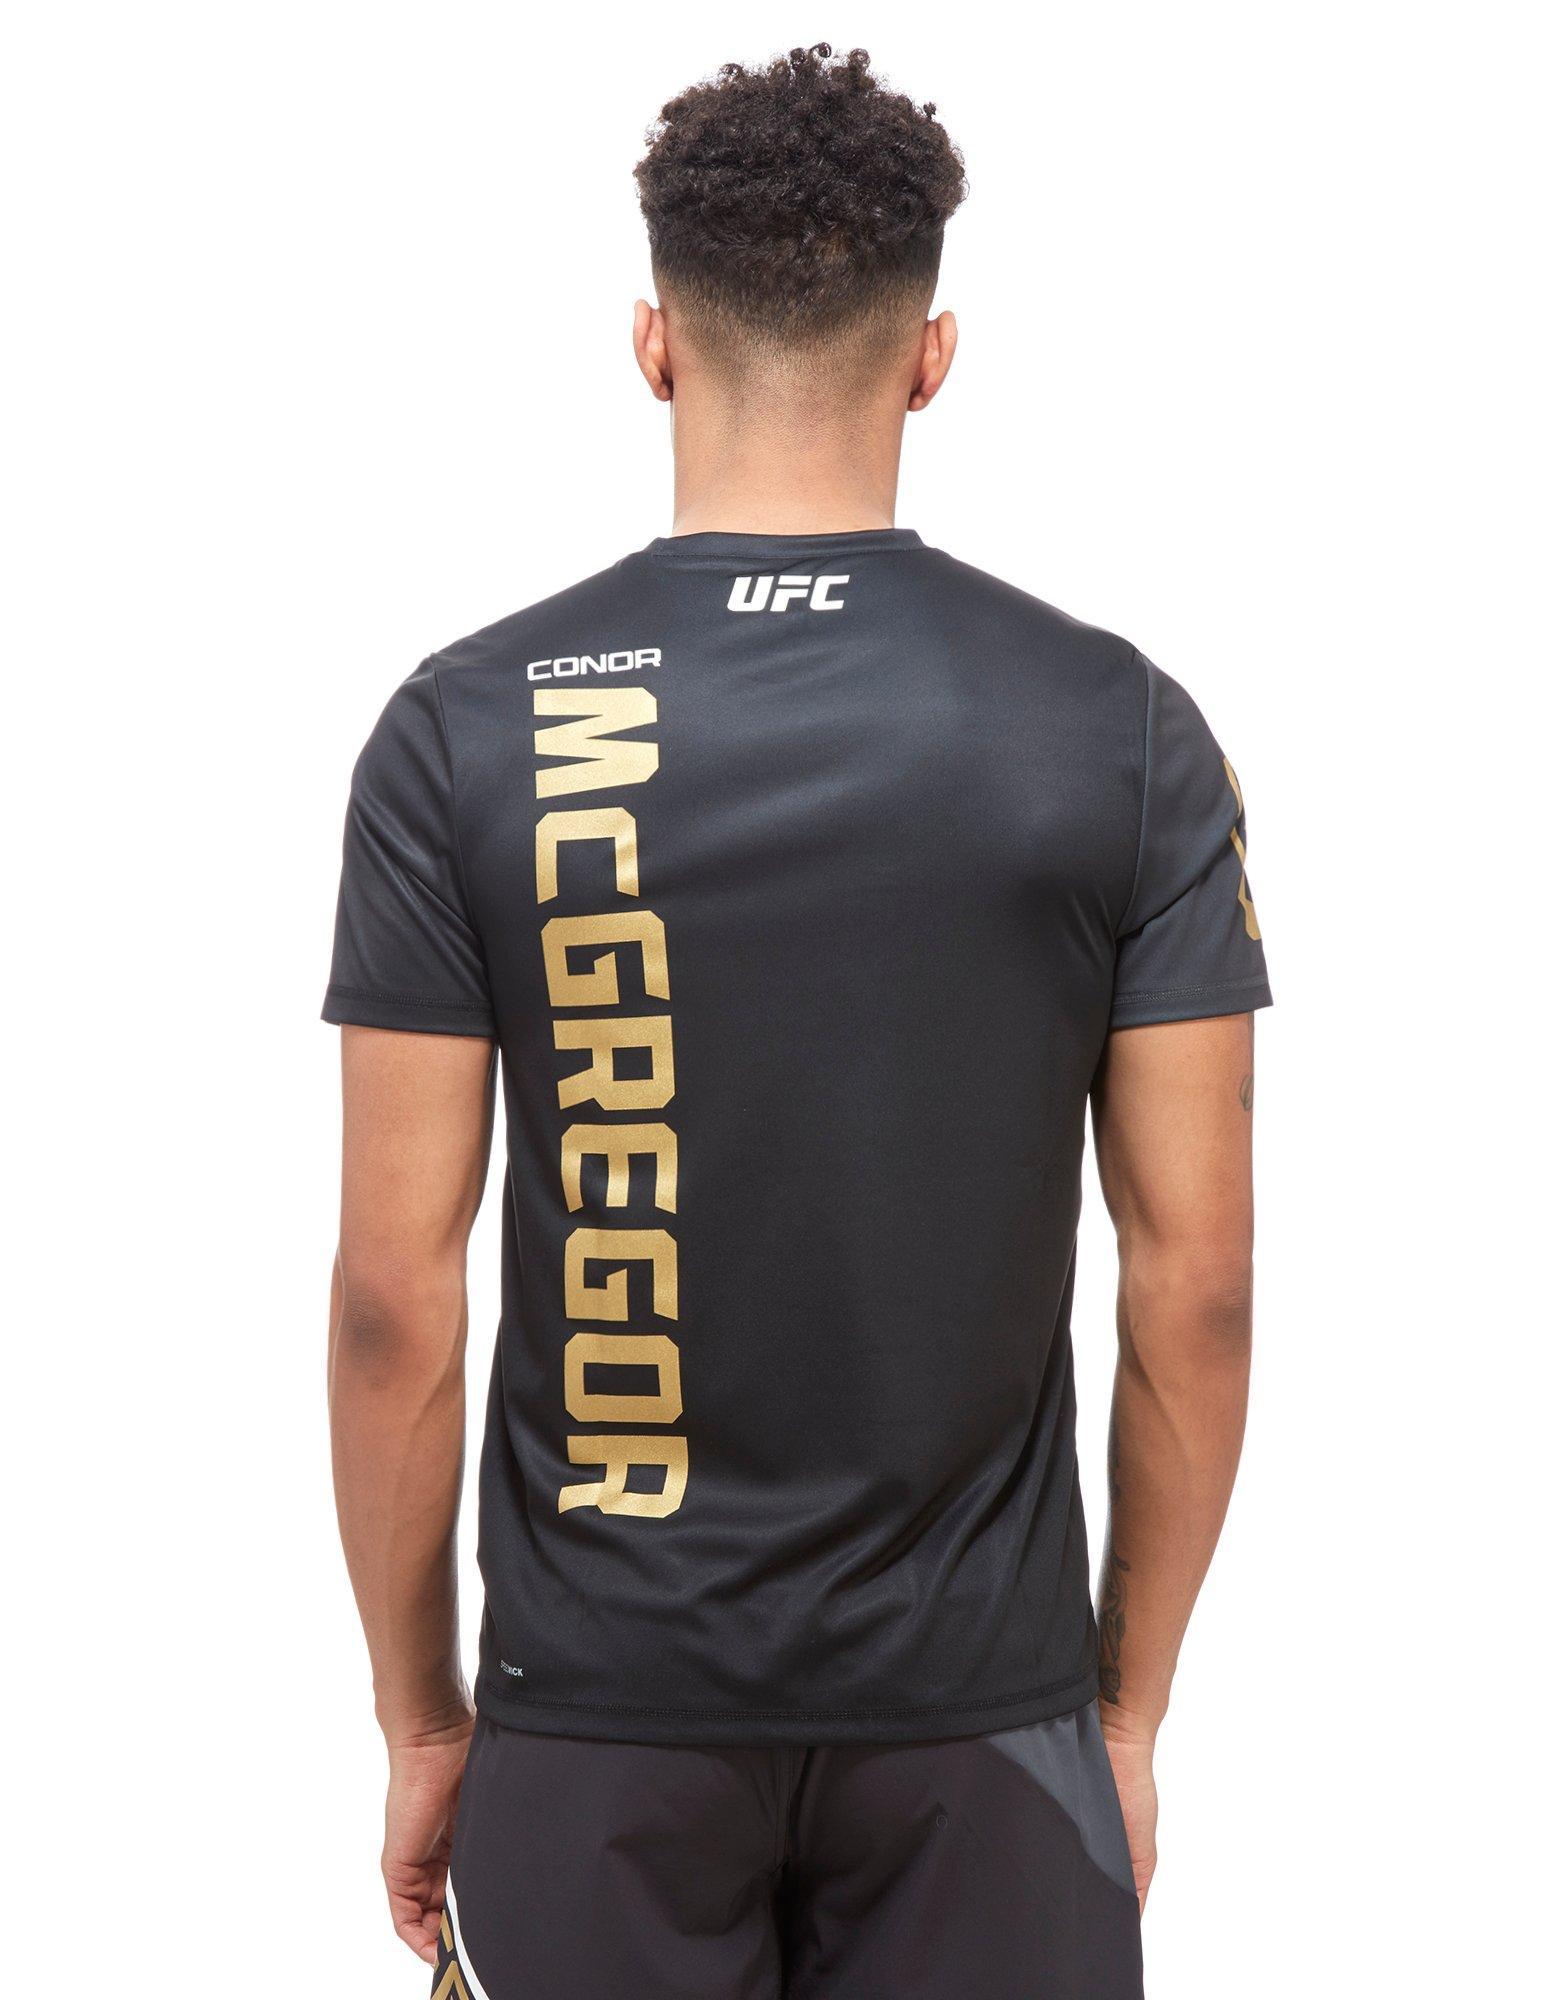 Reebok Synthetic Ufc Conor Mcgregor Walkout T-shirt in Black/Gold (Black)  for Men - Lyst